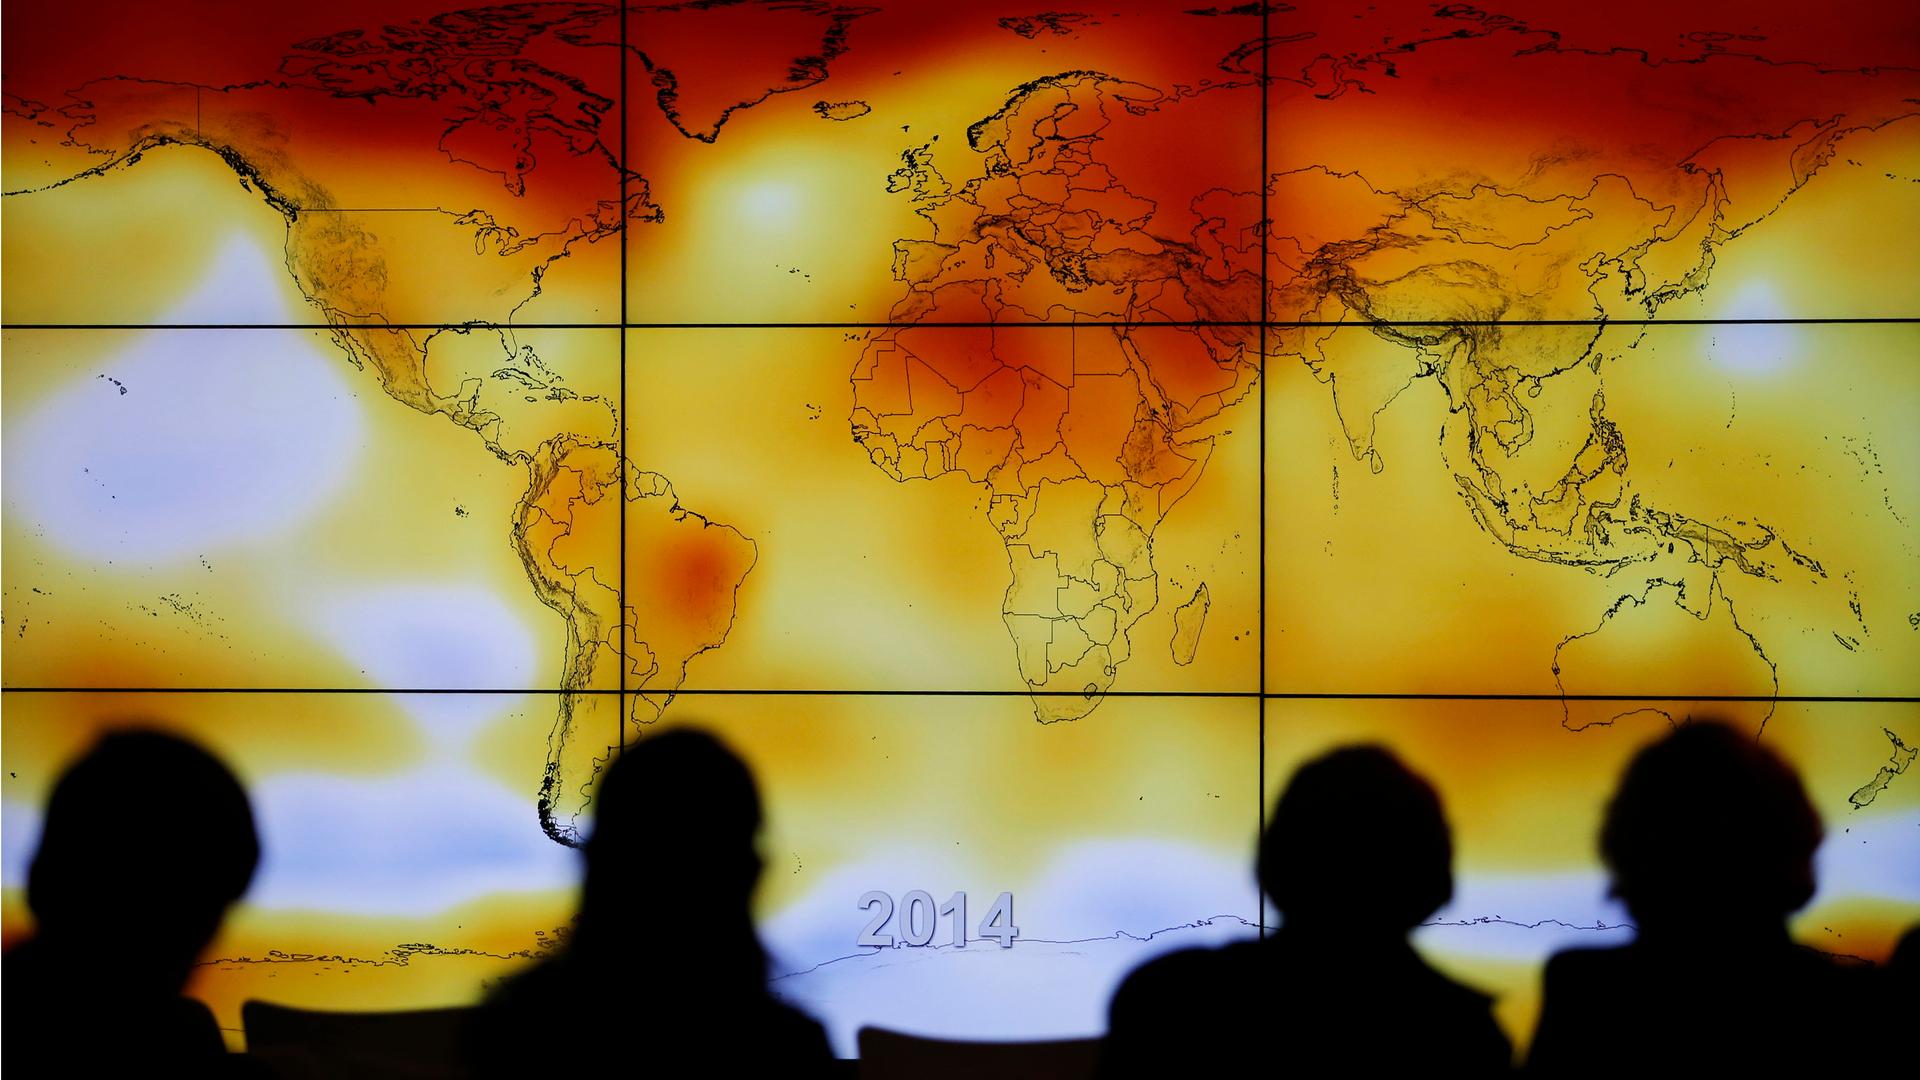 Participants view a world map with climate anomalies during the World Climate Change Conference 2015 (COP21) at Le Bourget, near Paris. The conference is charged with producing a consensus agreement between 195 countries to limit the dangerous warming of 